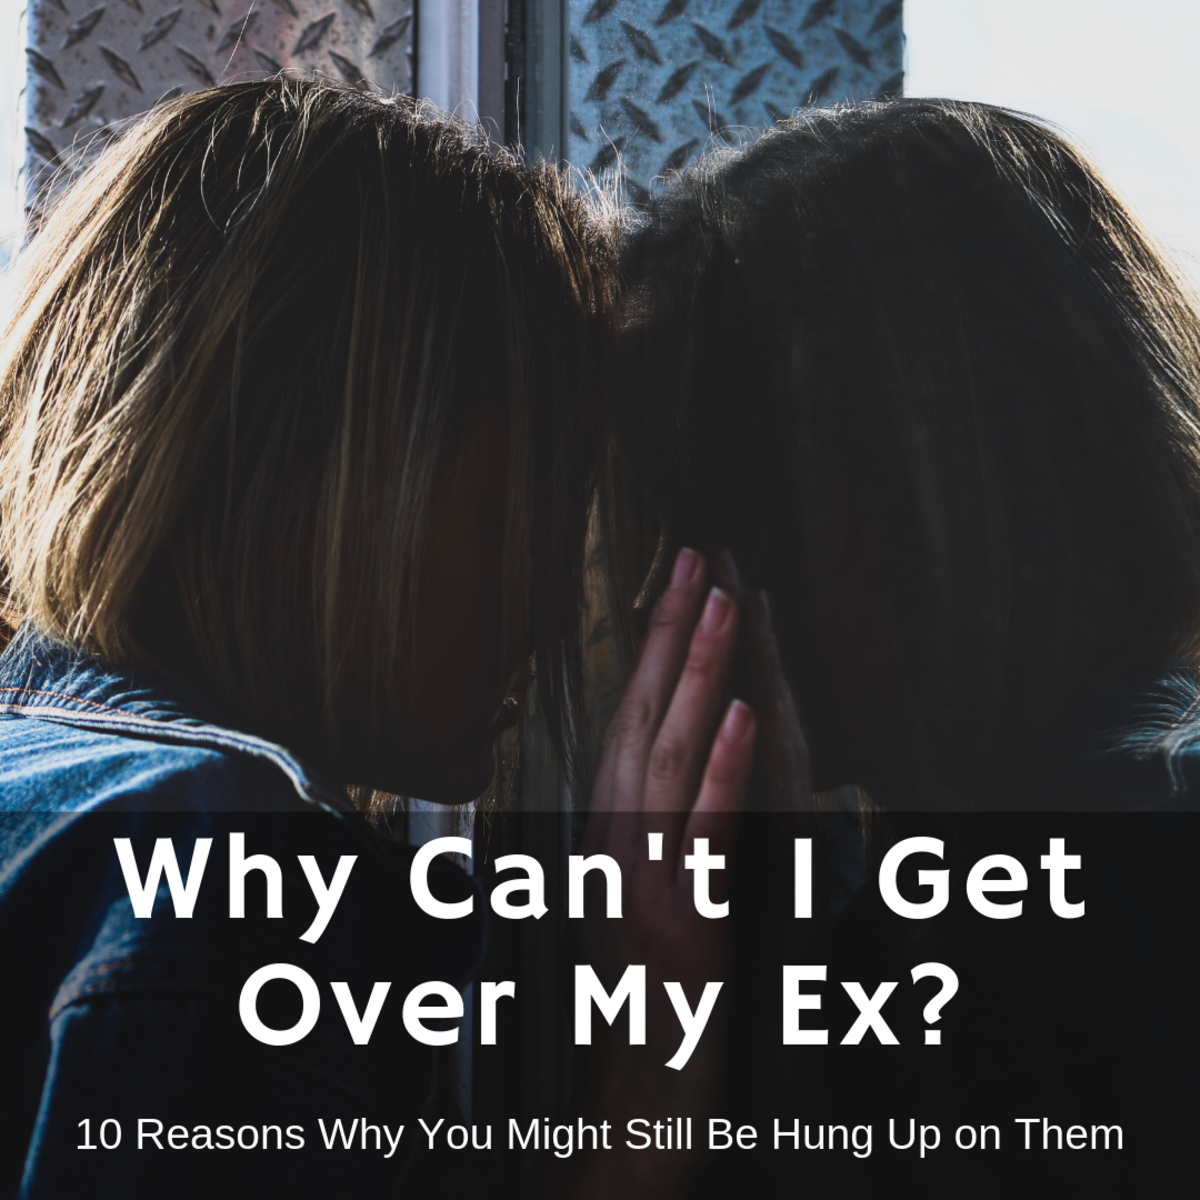 Why Can't I Get Over My Ex? 10 Reasons Why You're Still Hung Up